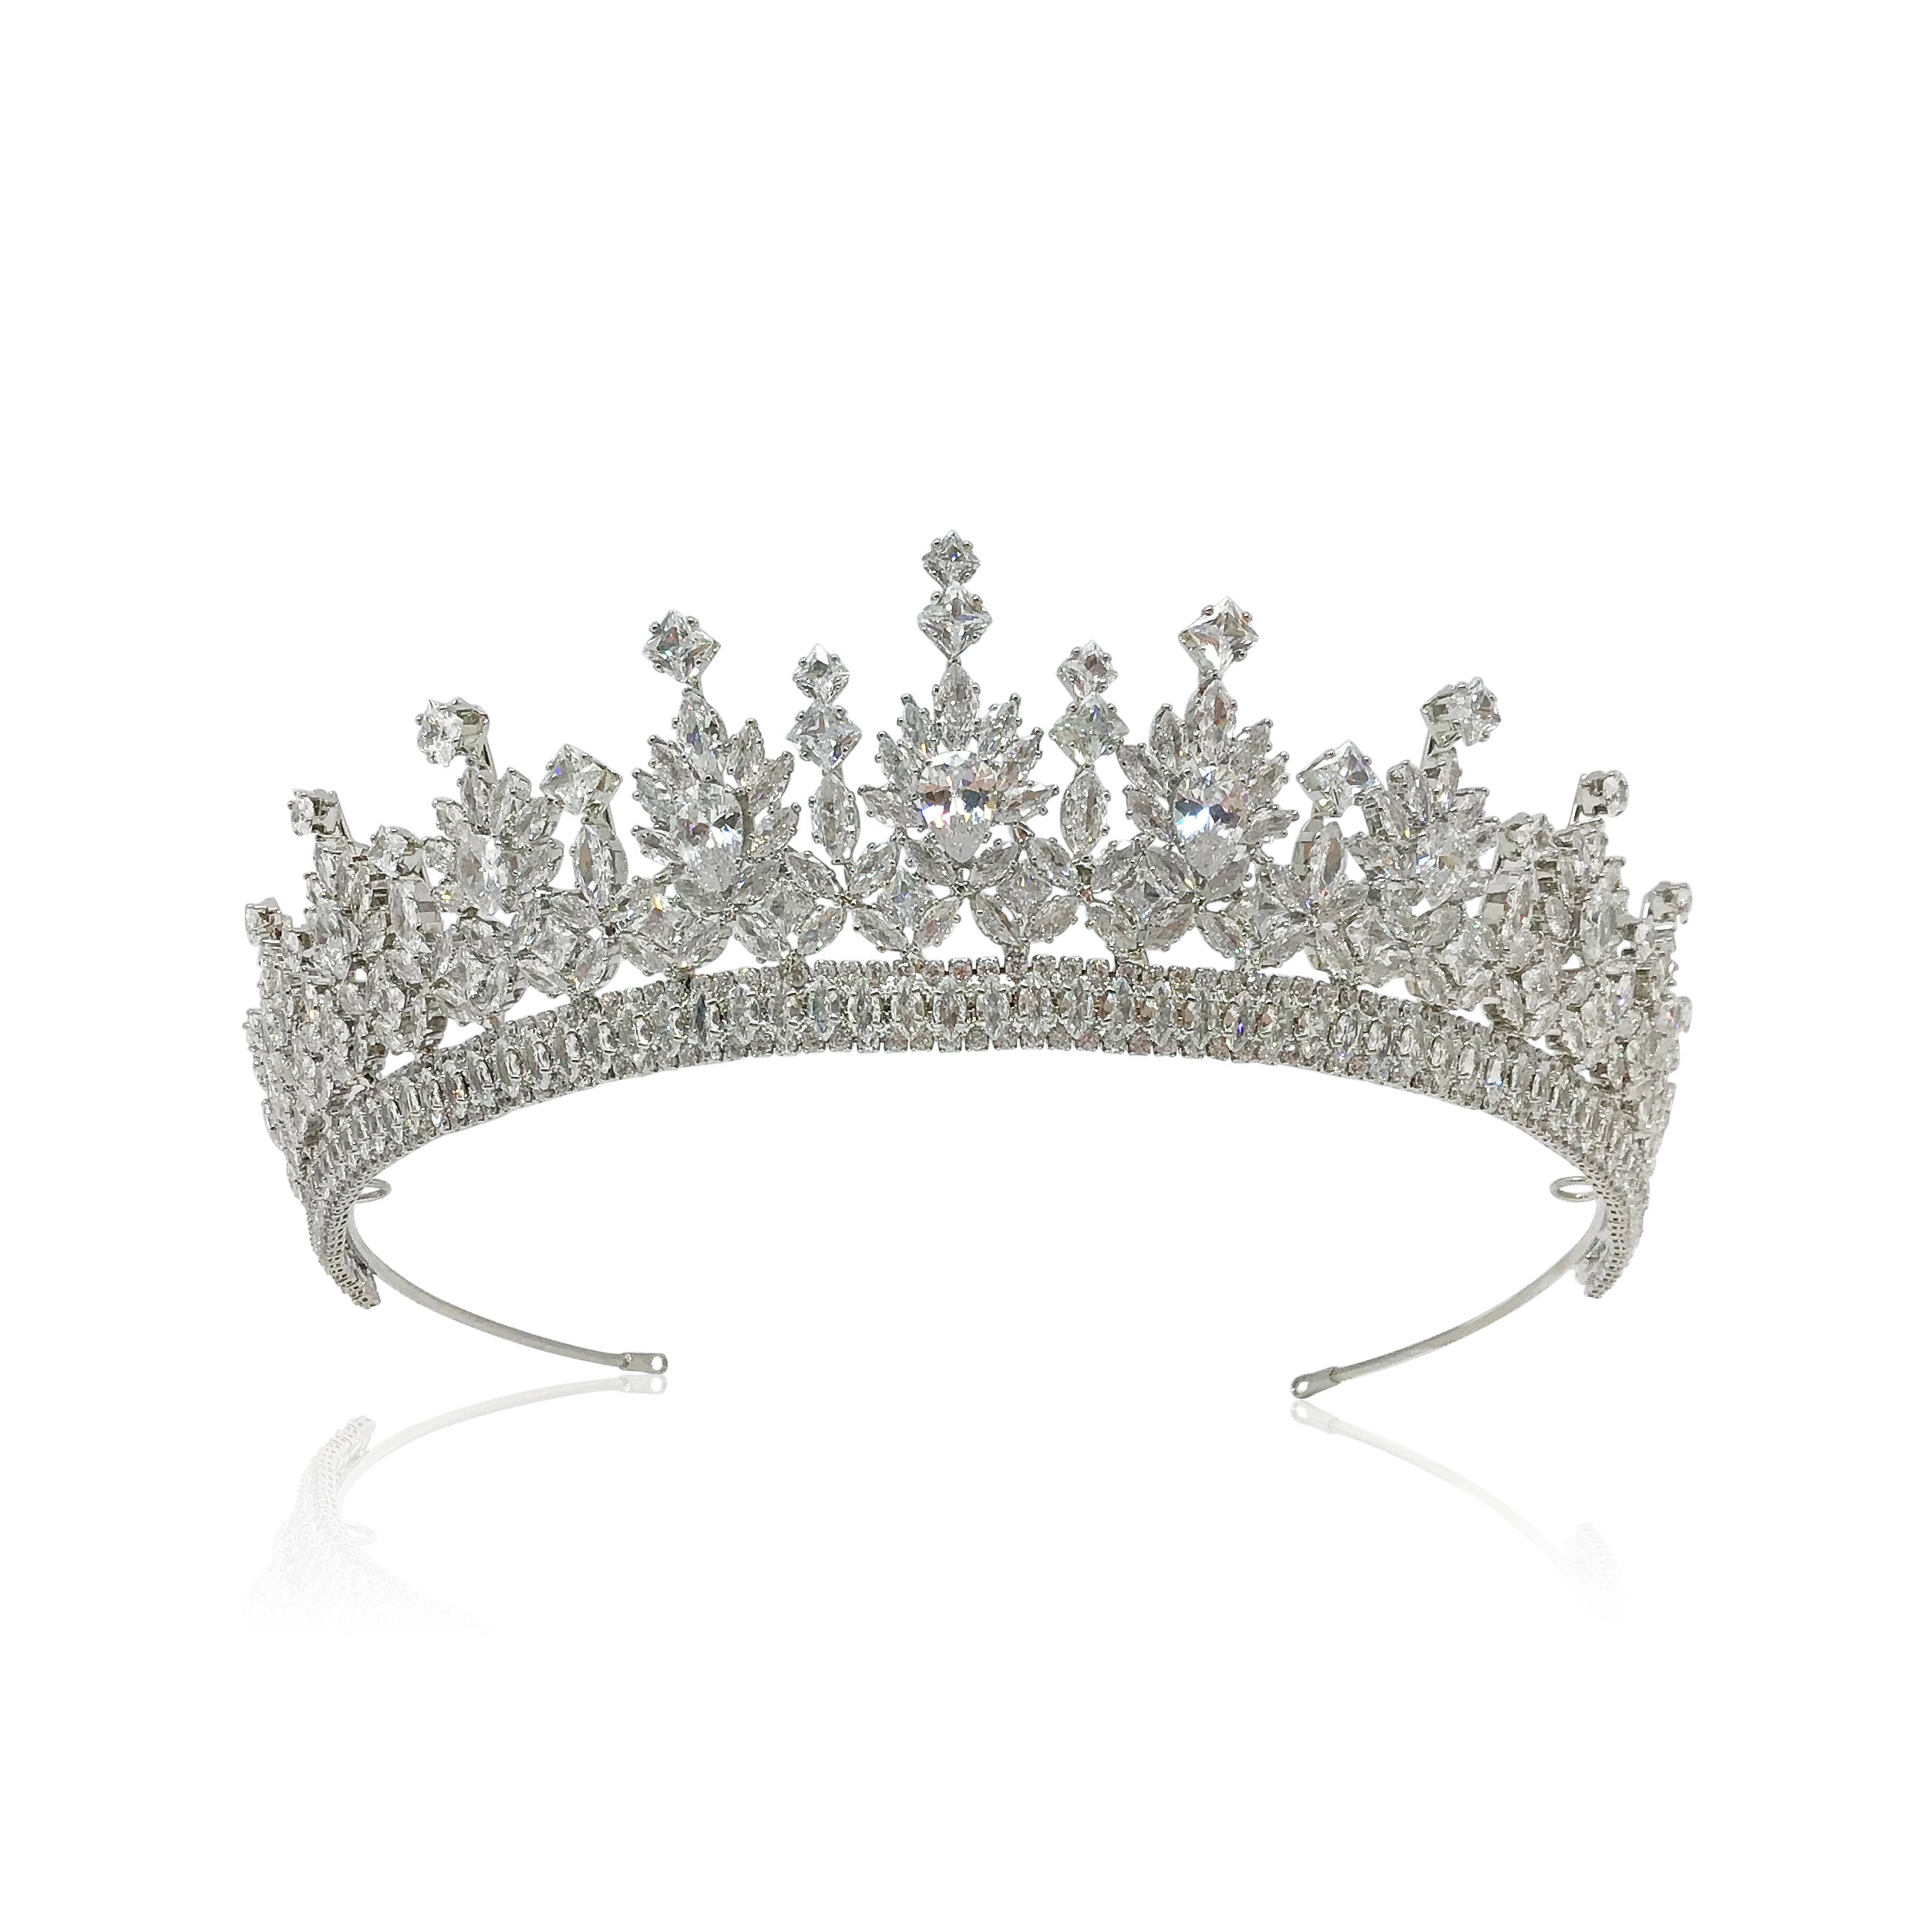 Crystal Crown |Anetta|Jeanette Maree|Shop Online Now